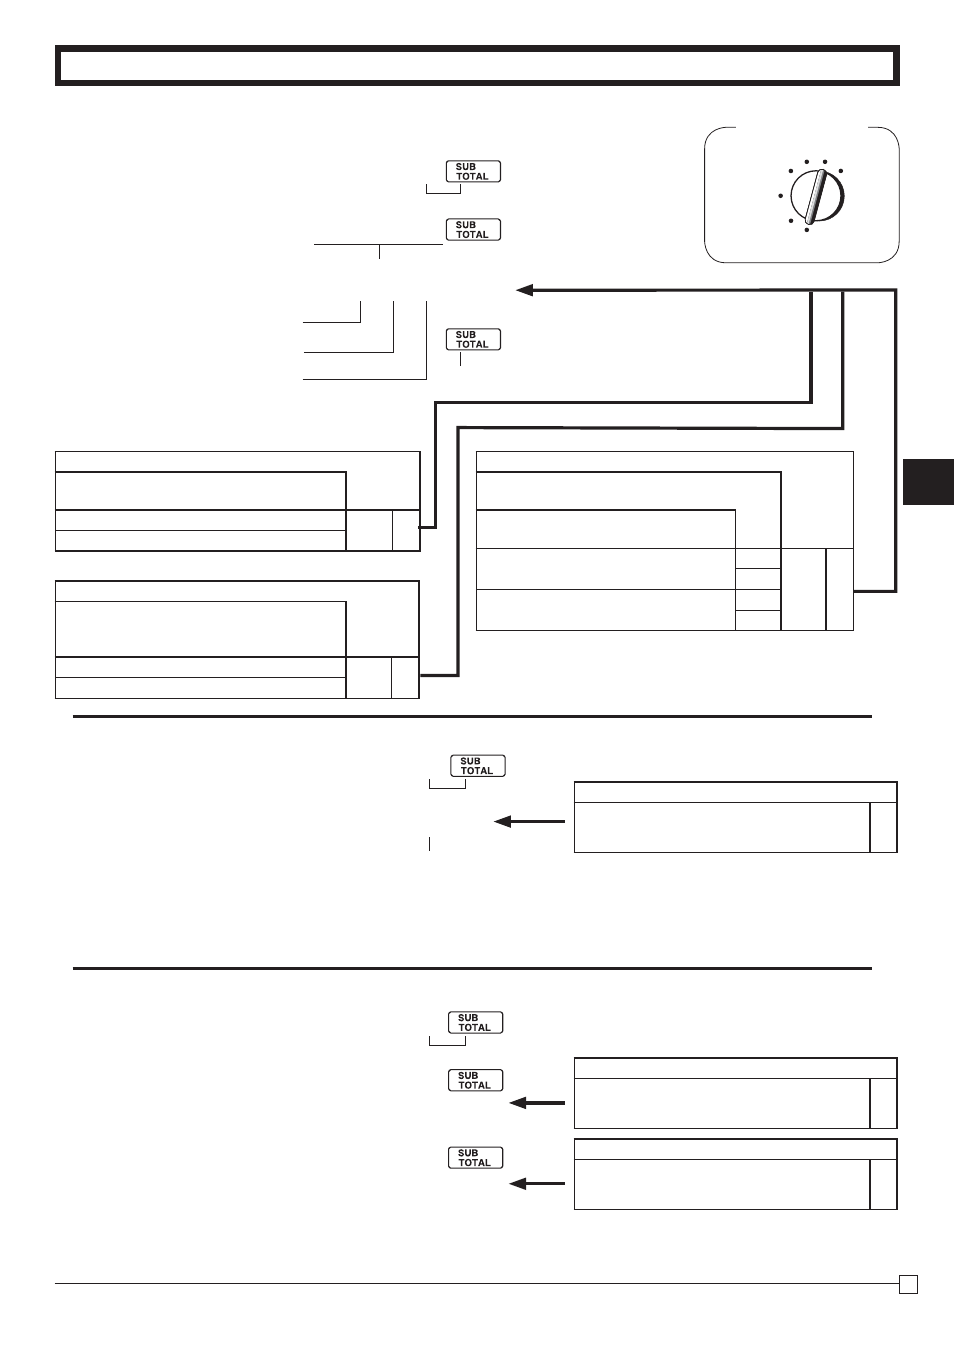 7-4 printer switch for receipt or journal, 7-3 to set report printing  controls, 7-5 receipt printing character/ key catch tone | Casio SE-S10  Manual User Manual | Page 25 / 48